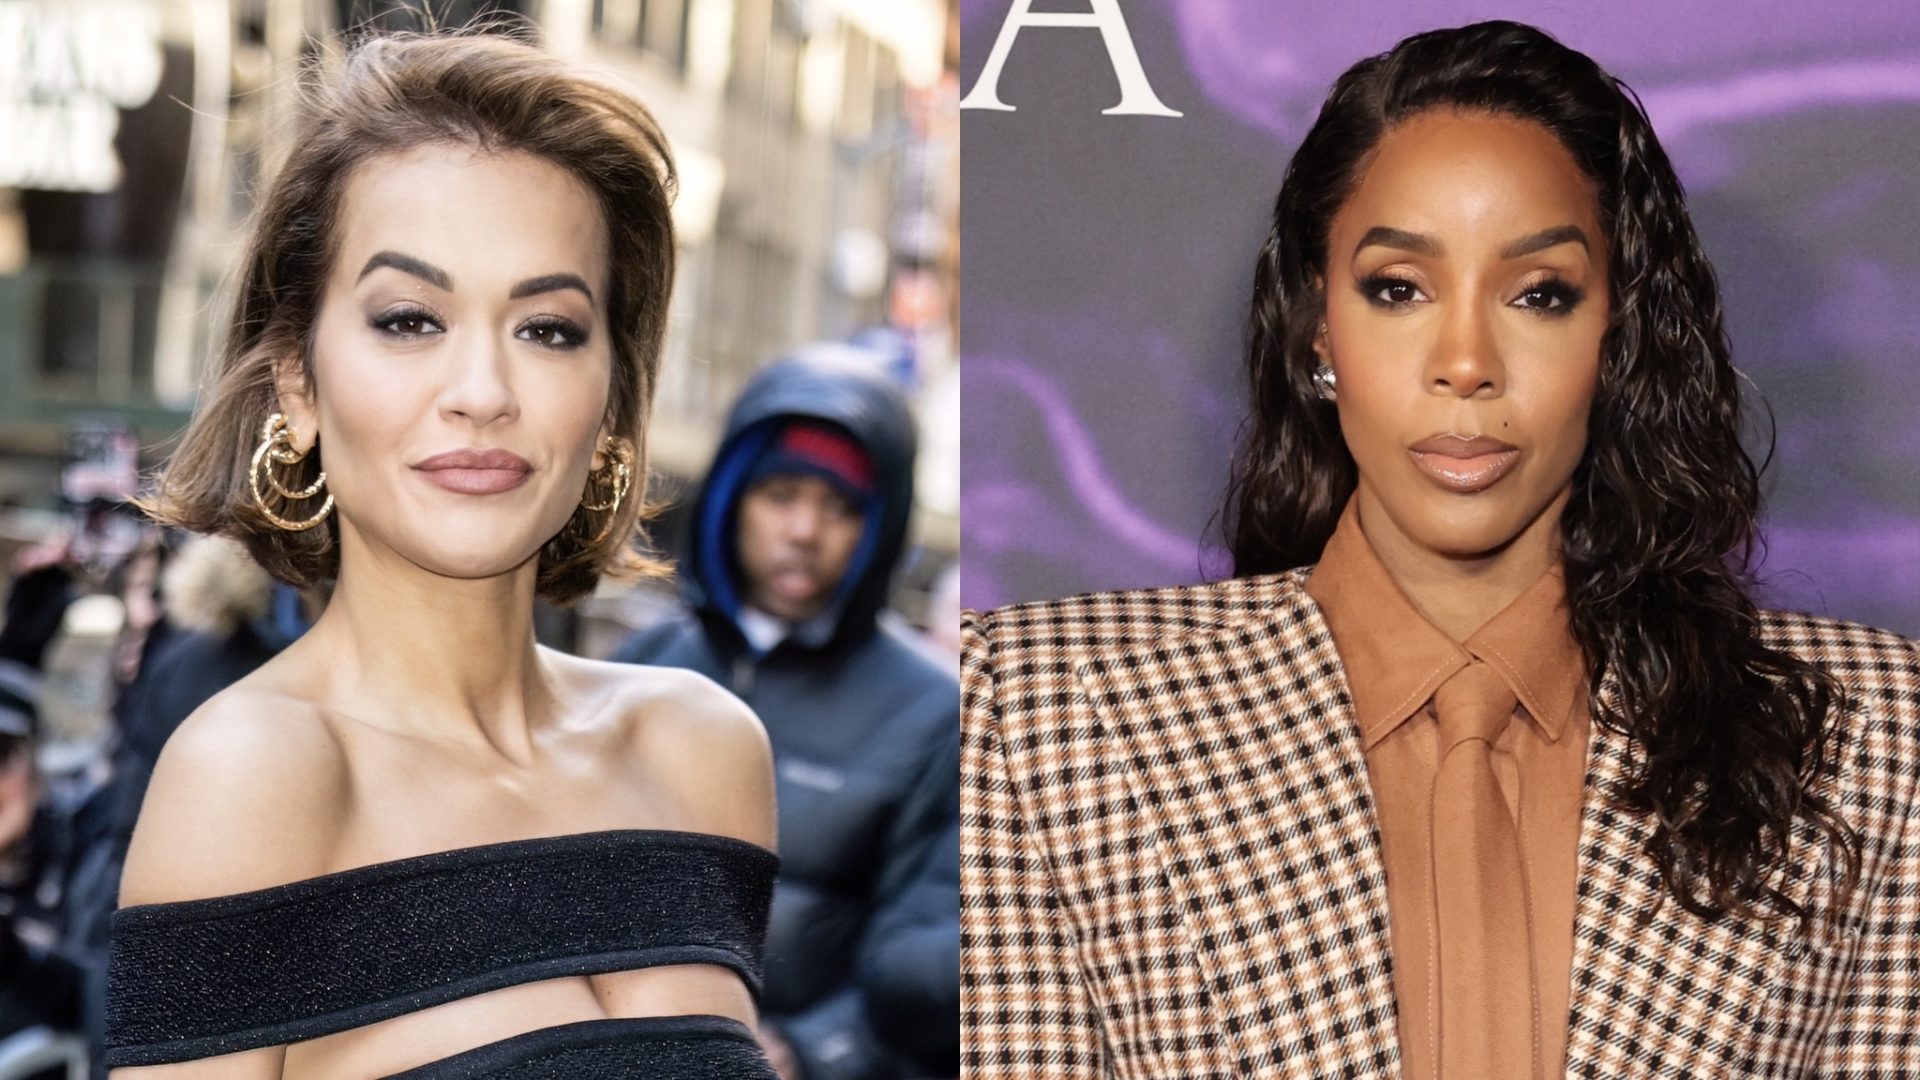 Oop! Rita Ora Seemingly Confirms Co-Hosting 'TODAY' Show After Kelly Rowland Reportedly Backed Out Last Minute